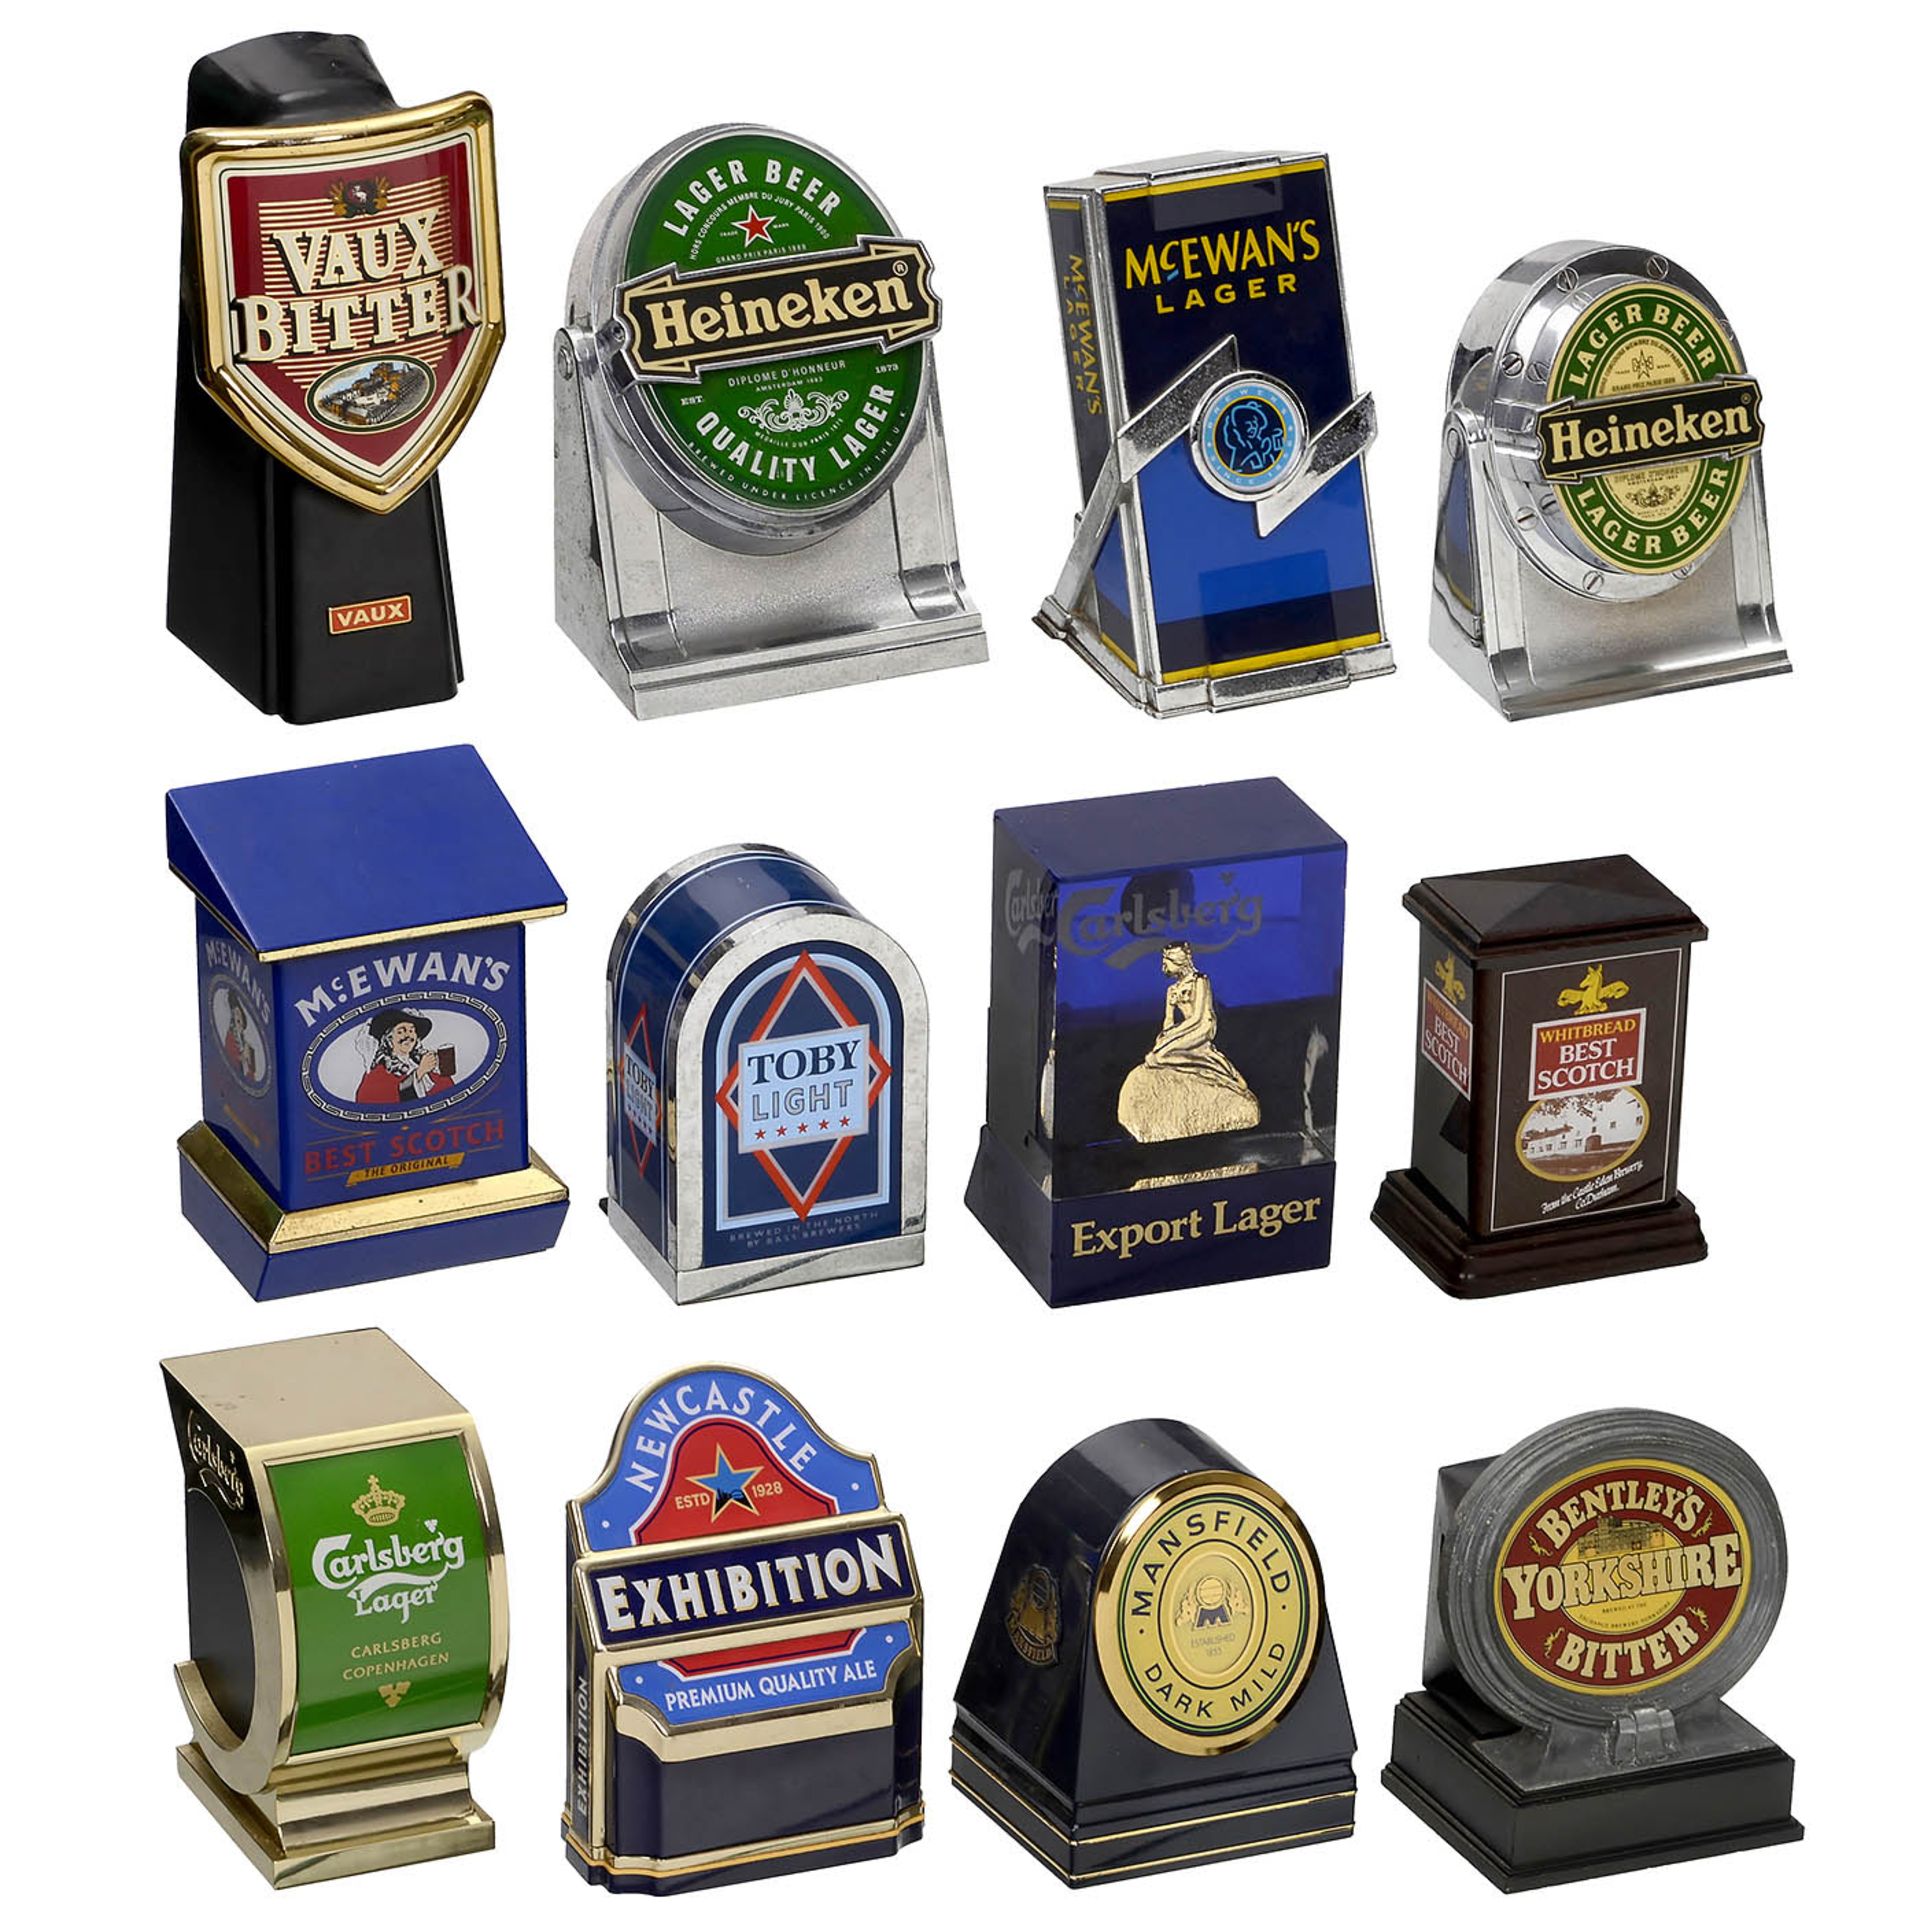 12 Illuminated Advertising Beer Signs - Image 2 of 5